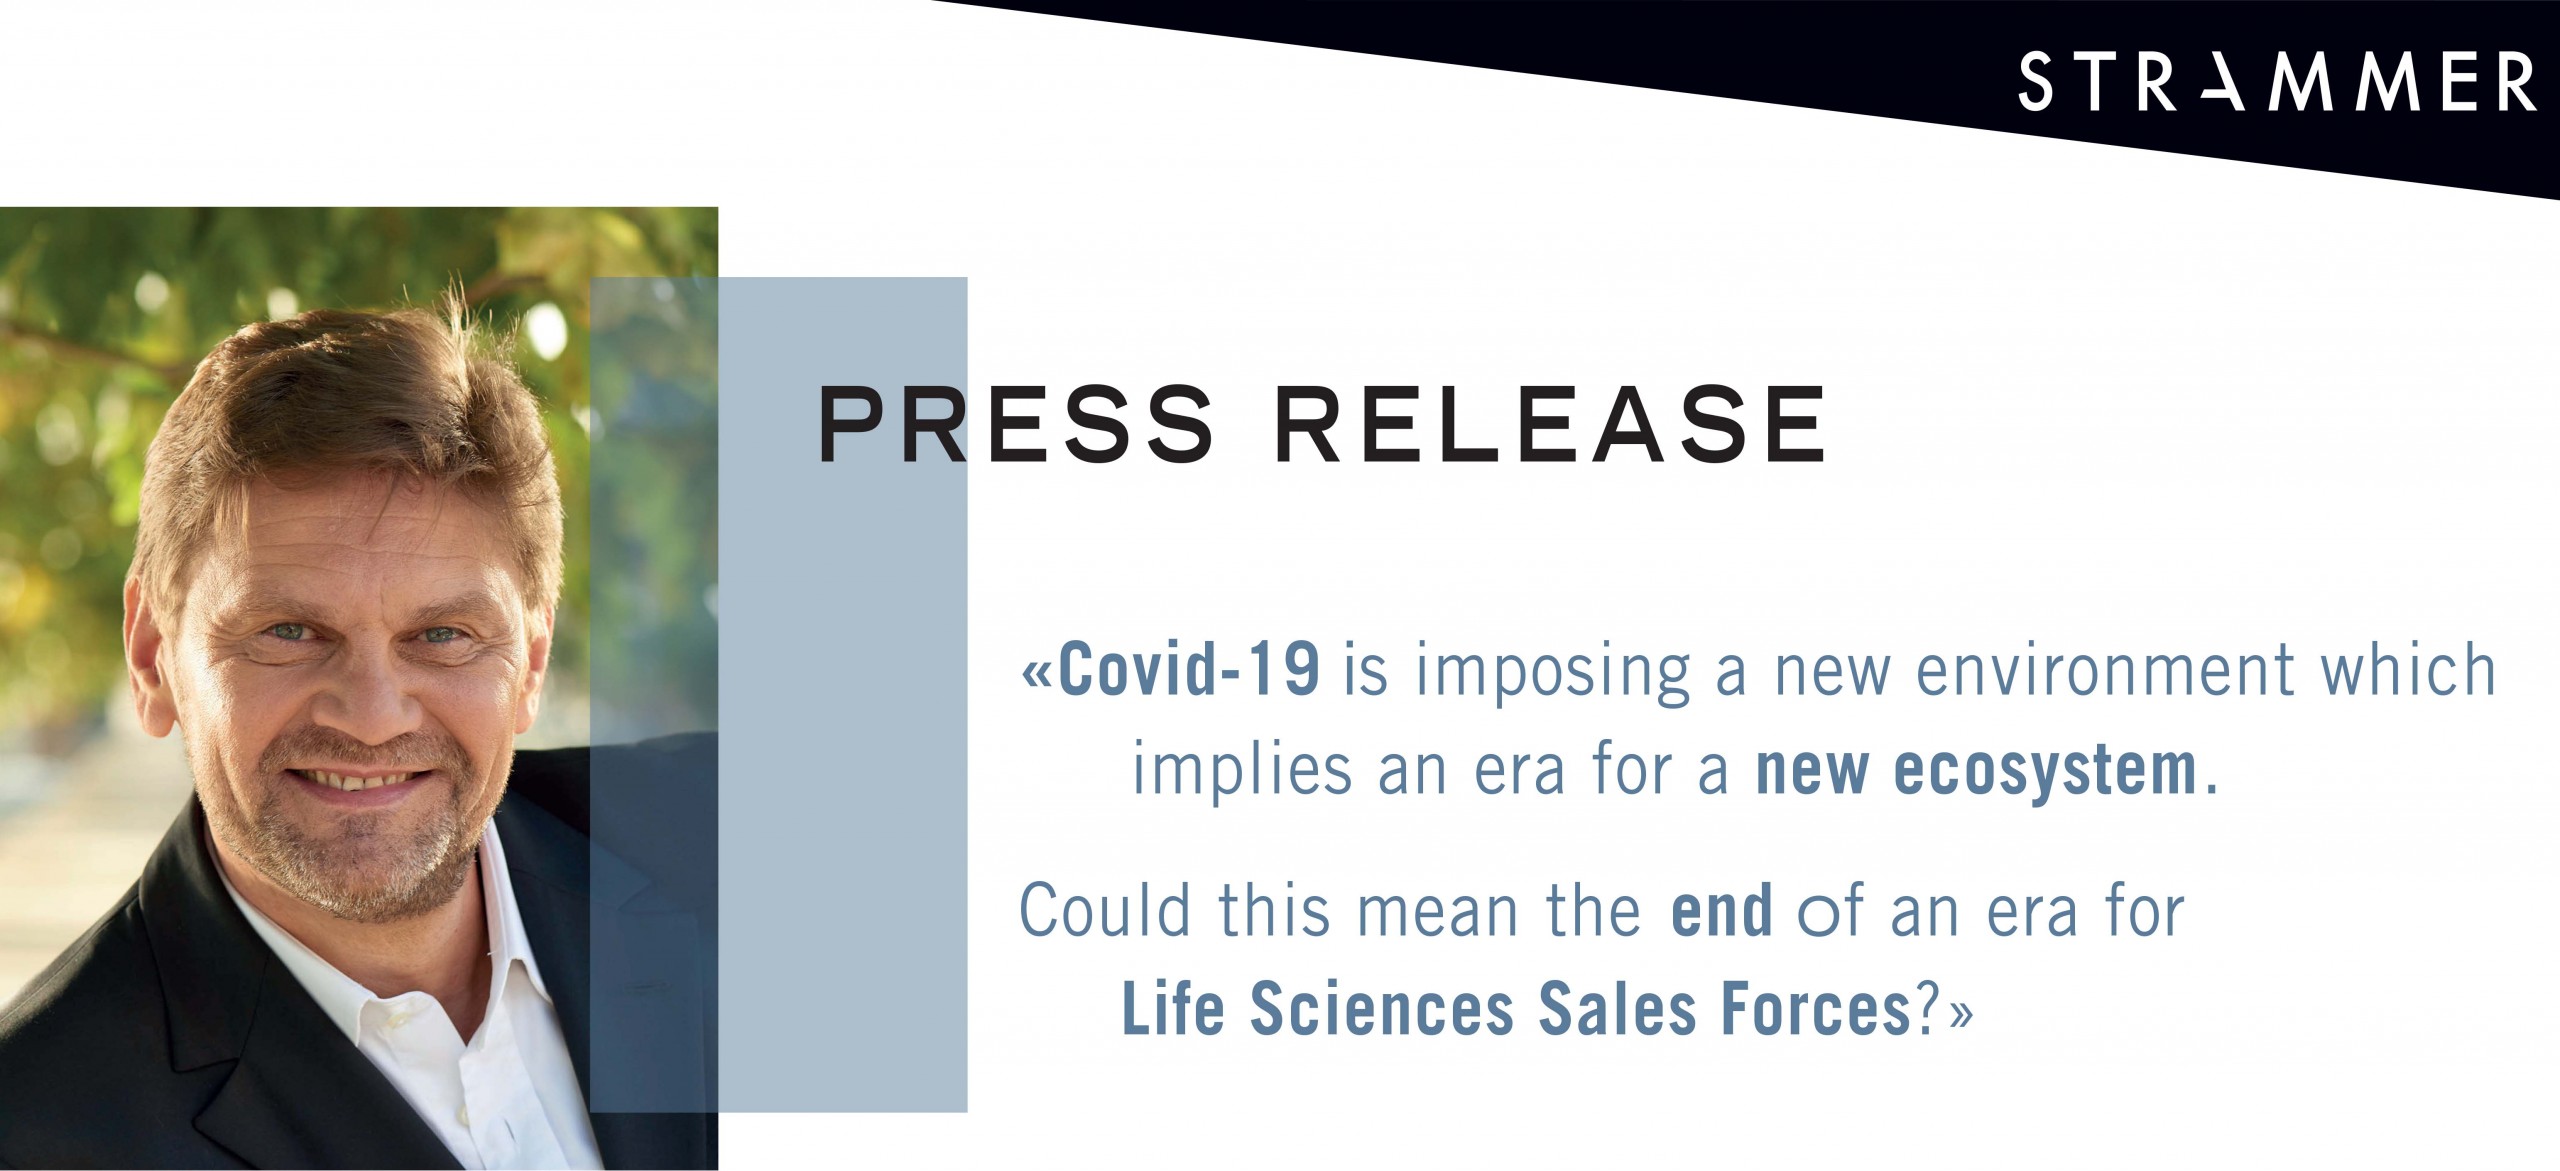 Future of Life Sciences Sales Forces